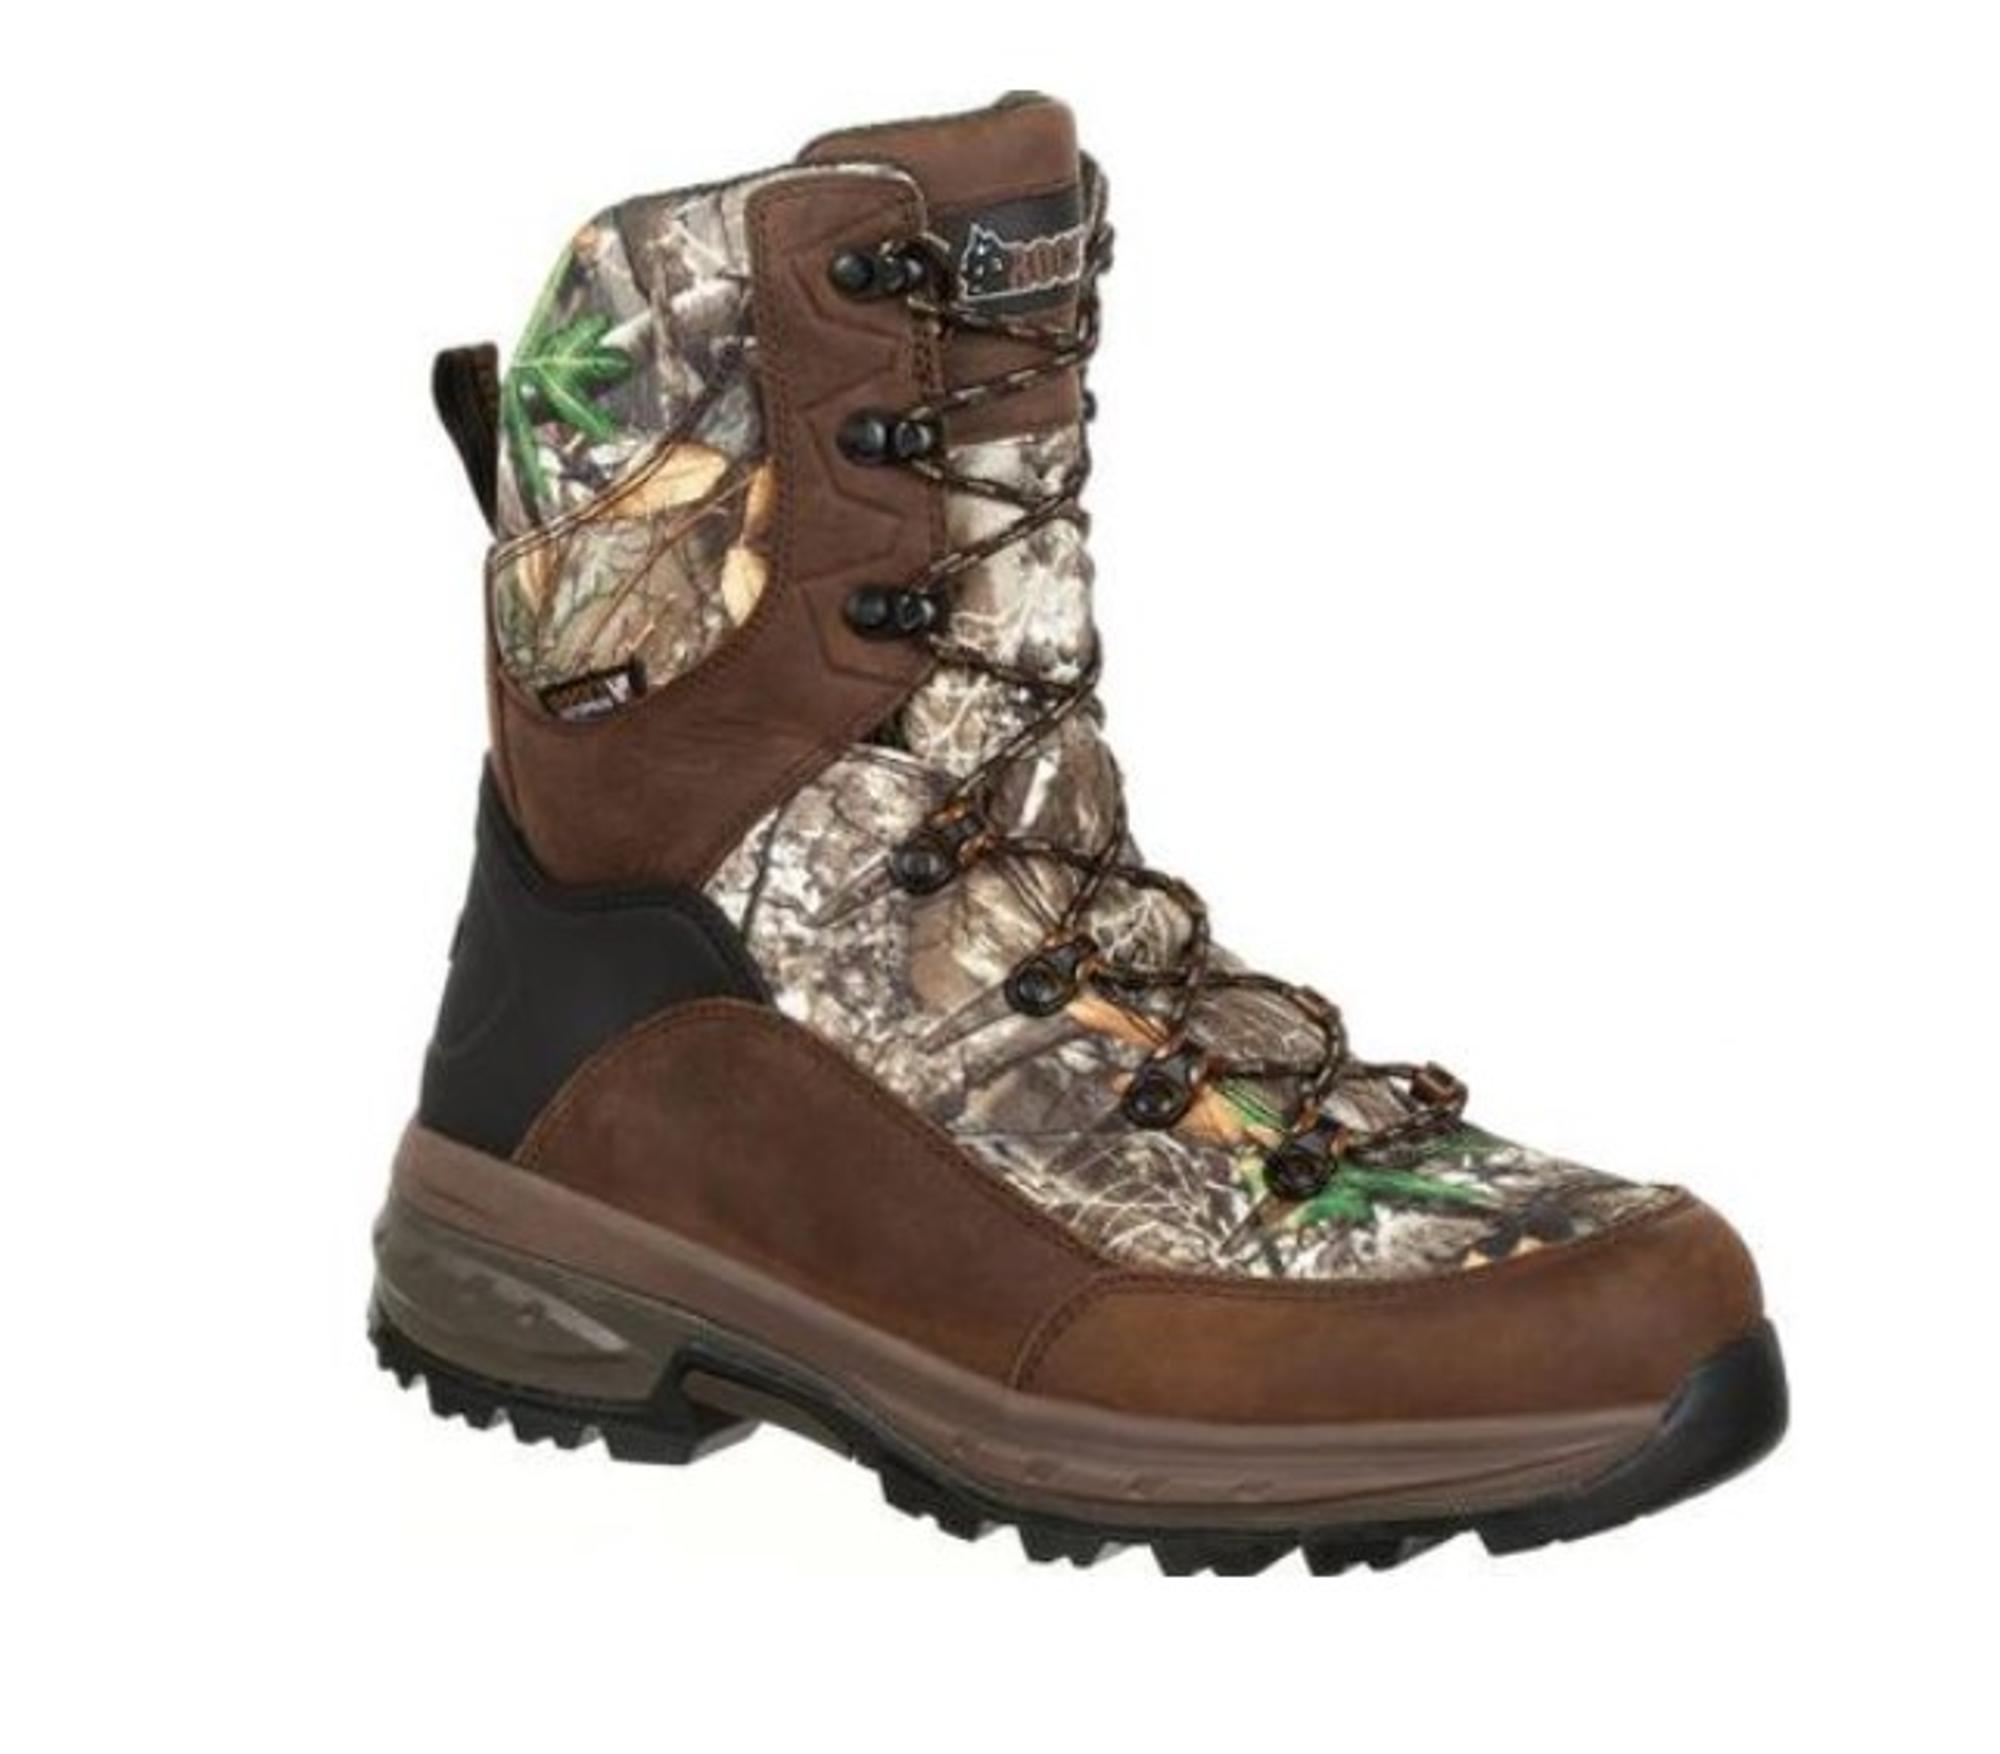 Grizzly 100g Wp Insulated Boots